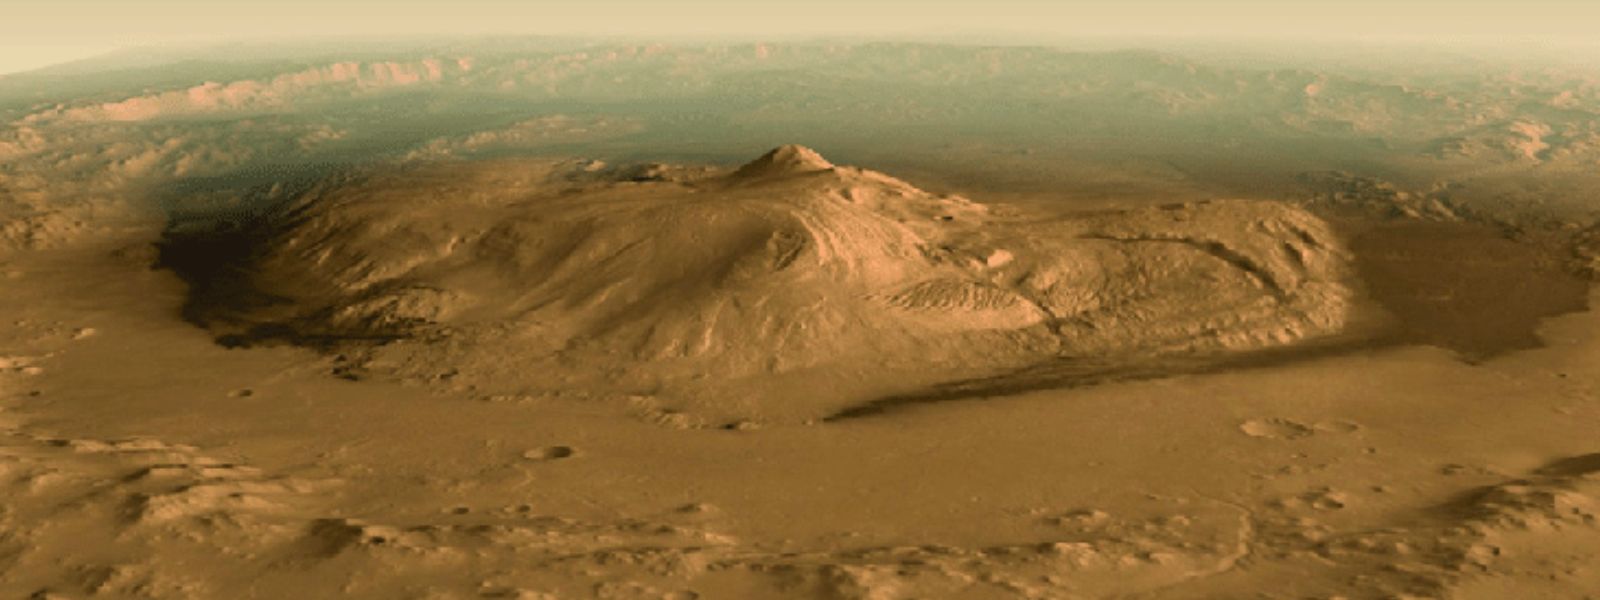 Geological conditions in Mars detected in SL